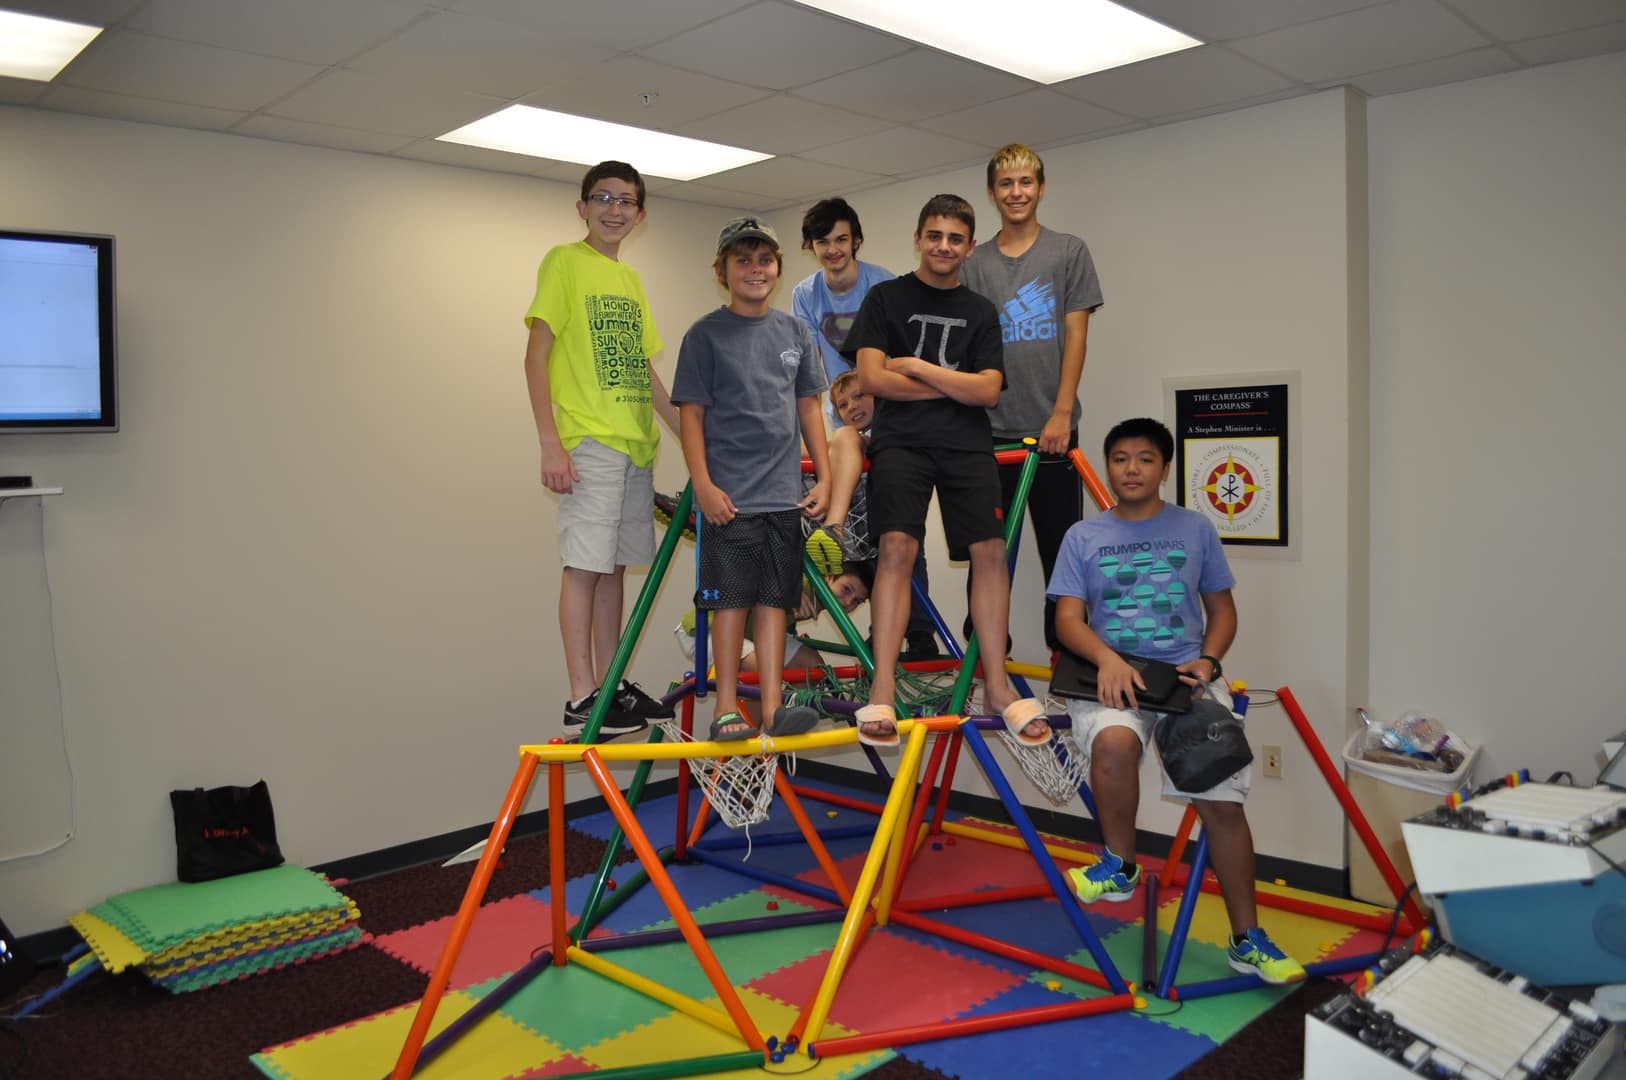 KU-Tampa Professor Hosts Summer Camp for Kids Serious About Learning Engineering While Having Fun